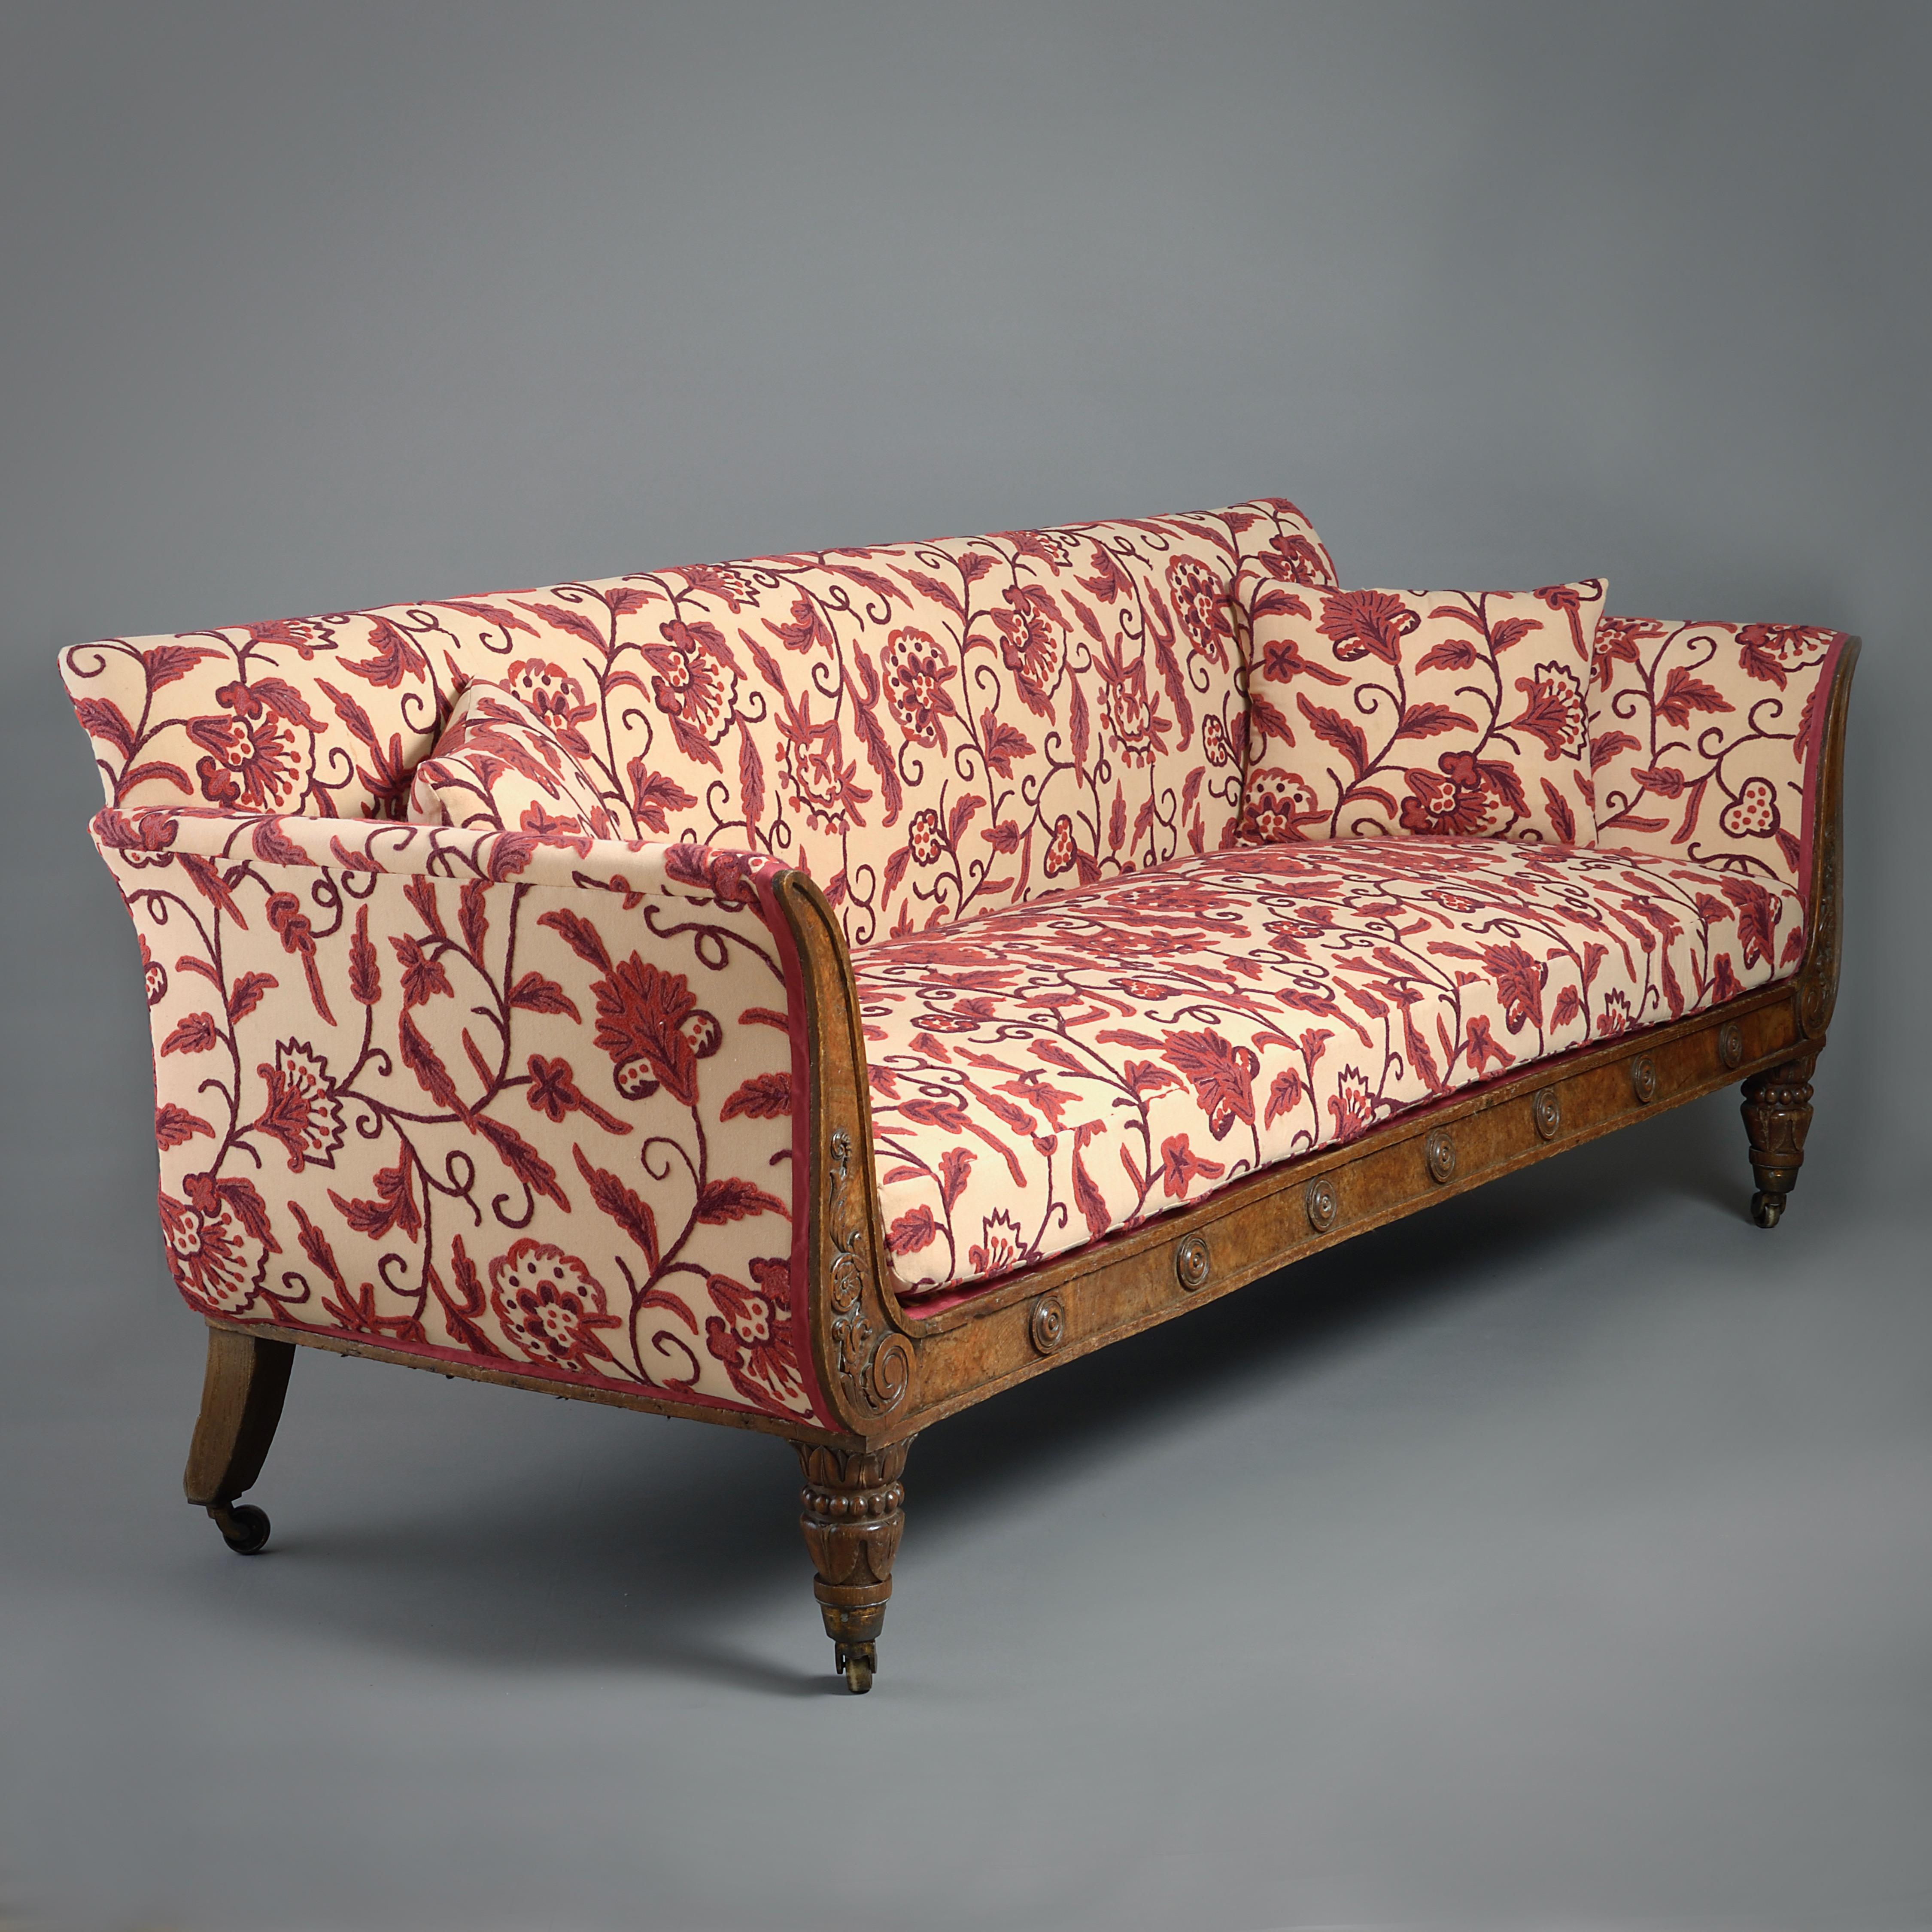 A FINE GEORGE IV POLLARD OAK SOFA UPHOLSTERED IN CREWEL WORK, CIRCA 1830.

The frame carved with foliage and applied with turned roundels.